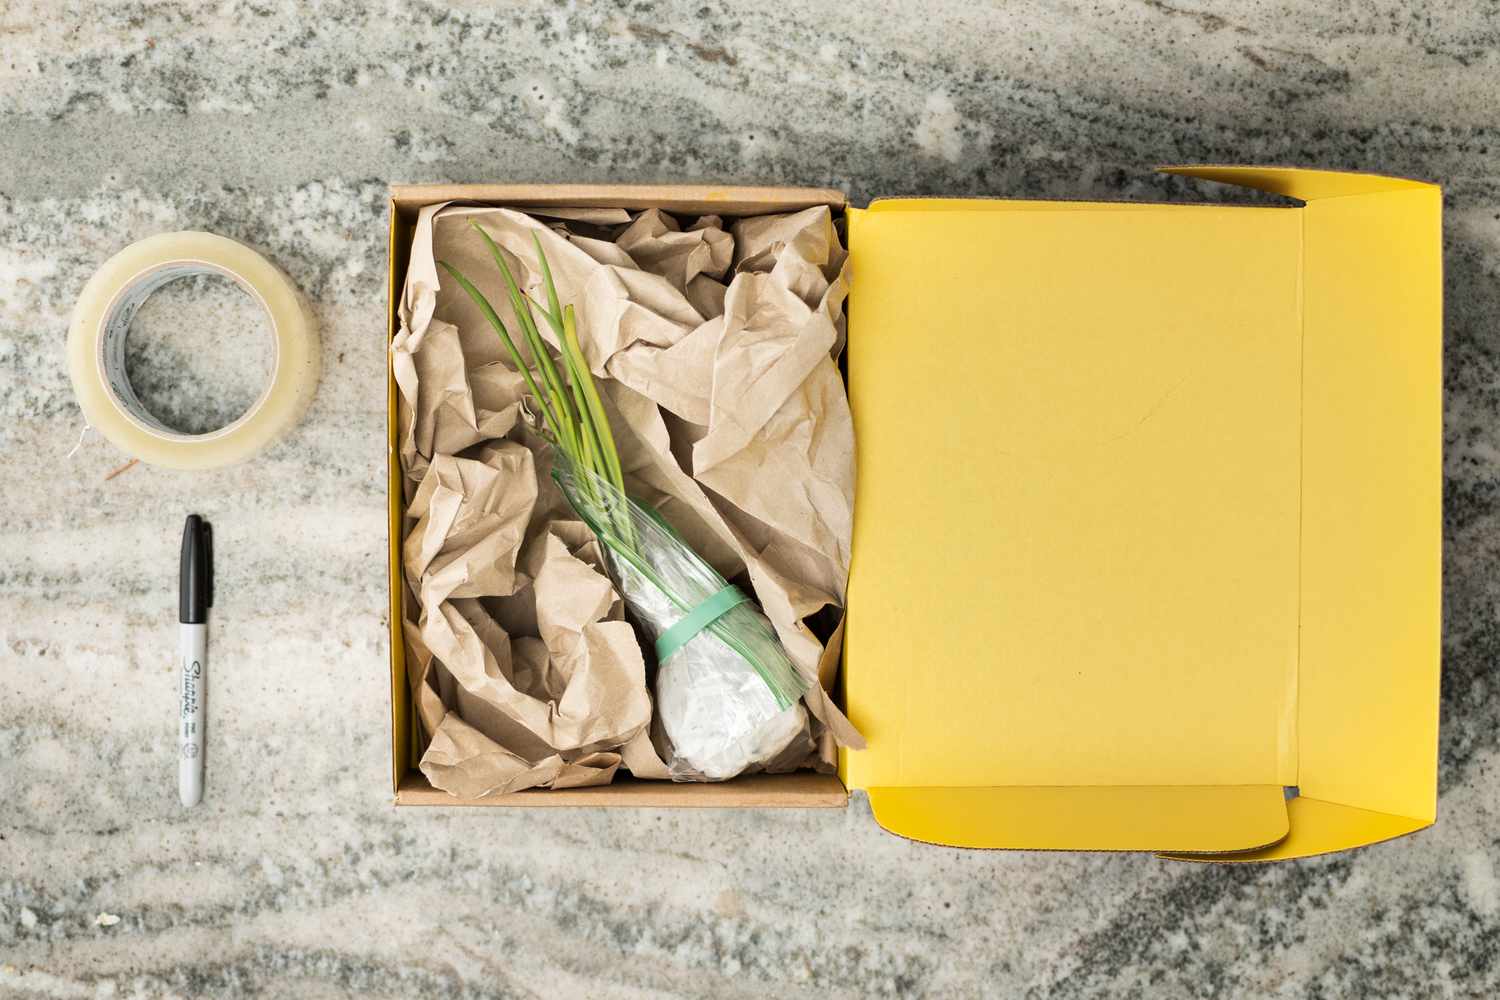 Extra space in box filled with packing paper around plant